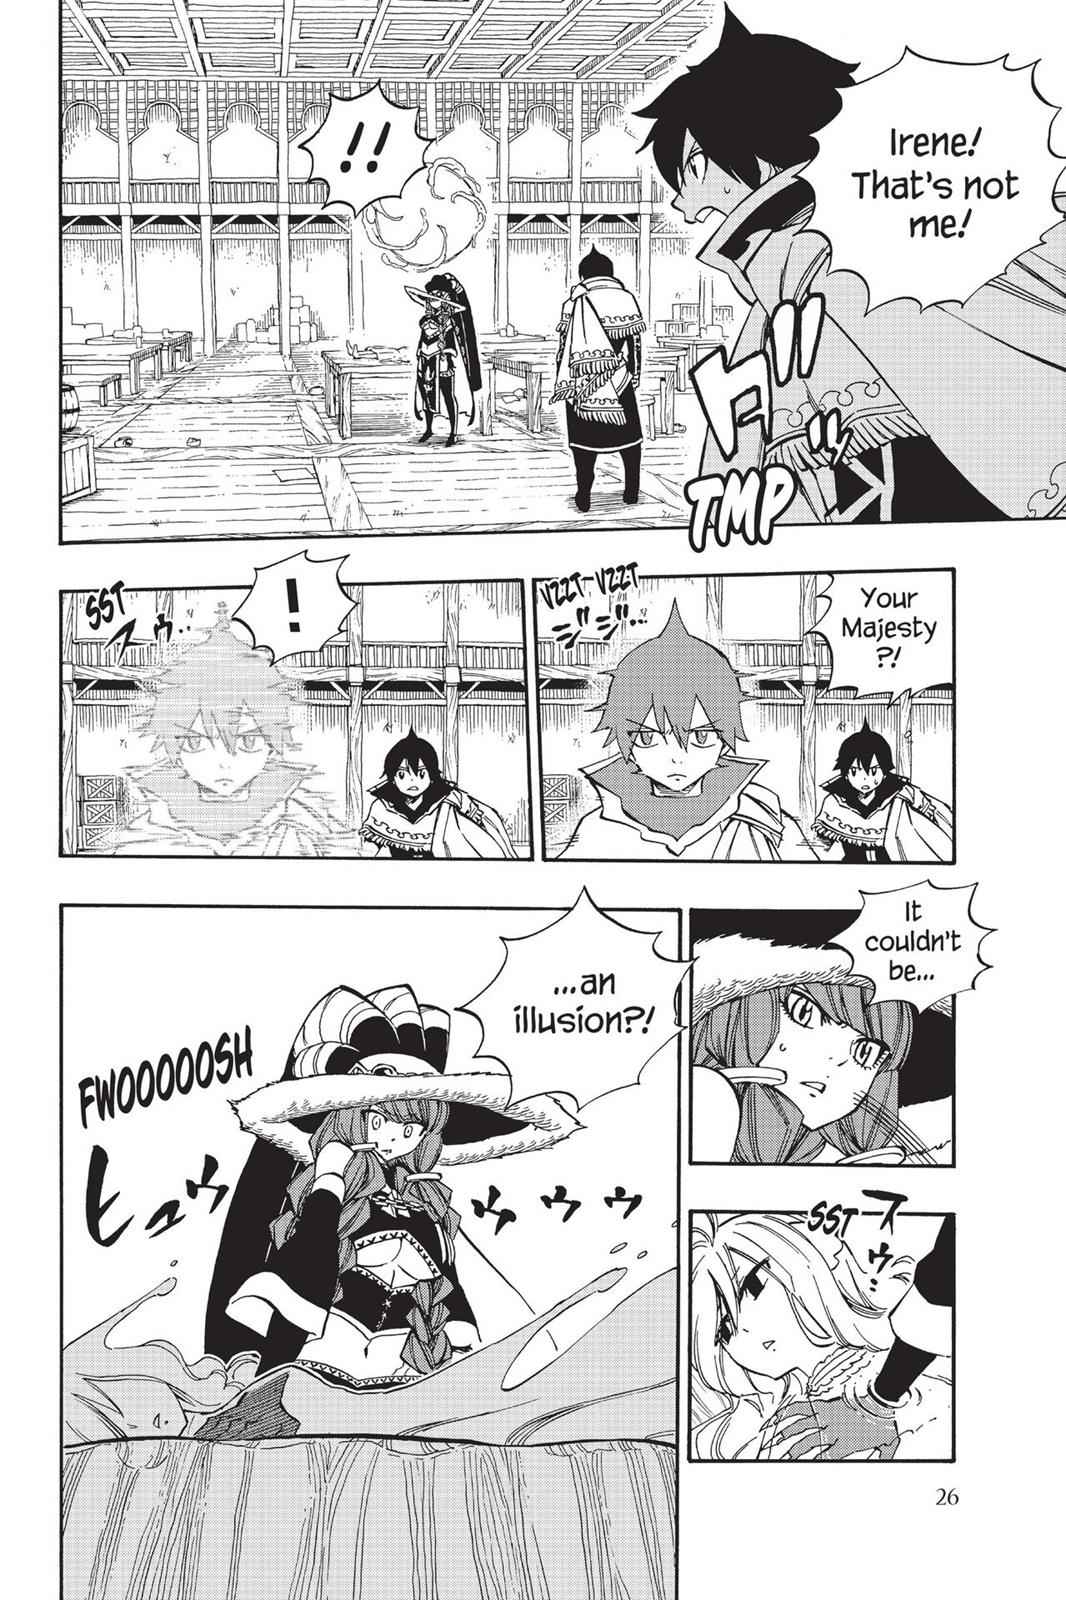  Chapter 502 image 004